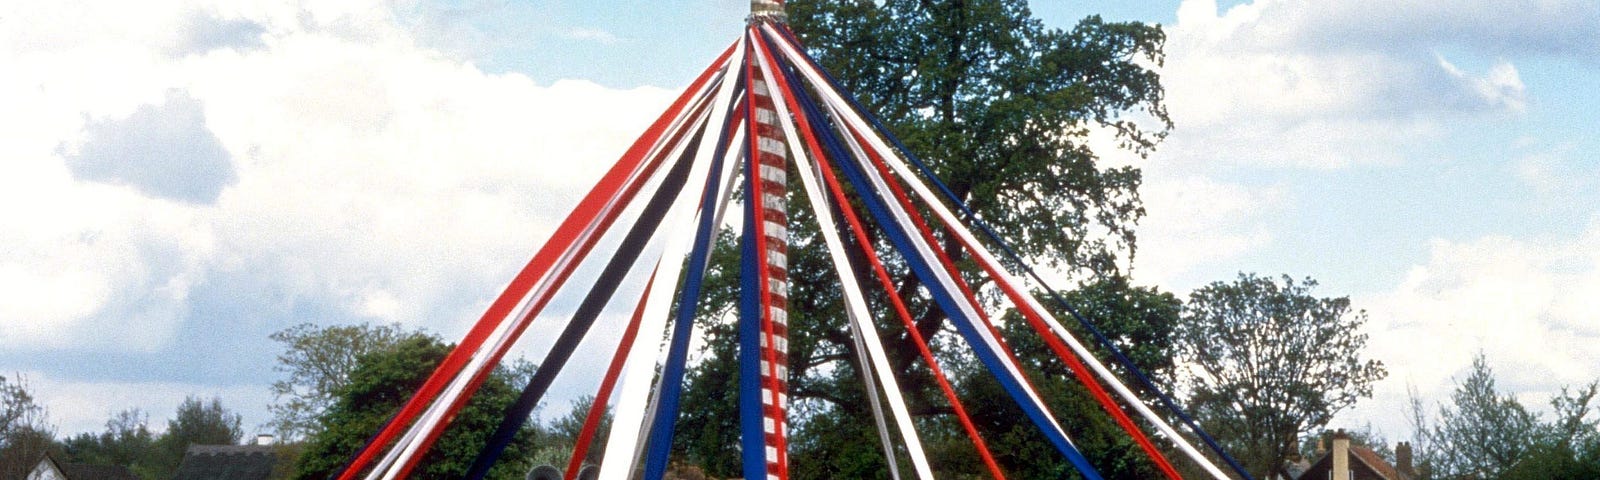 Maypole dance — a tall pole with ribbons hanging from the top with dancers holding the ends and moving around to form complex patterns